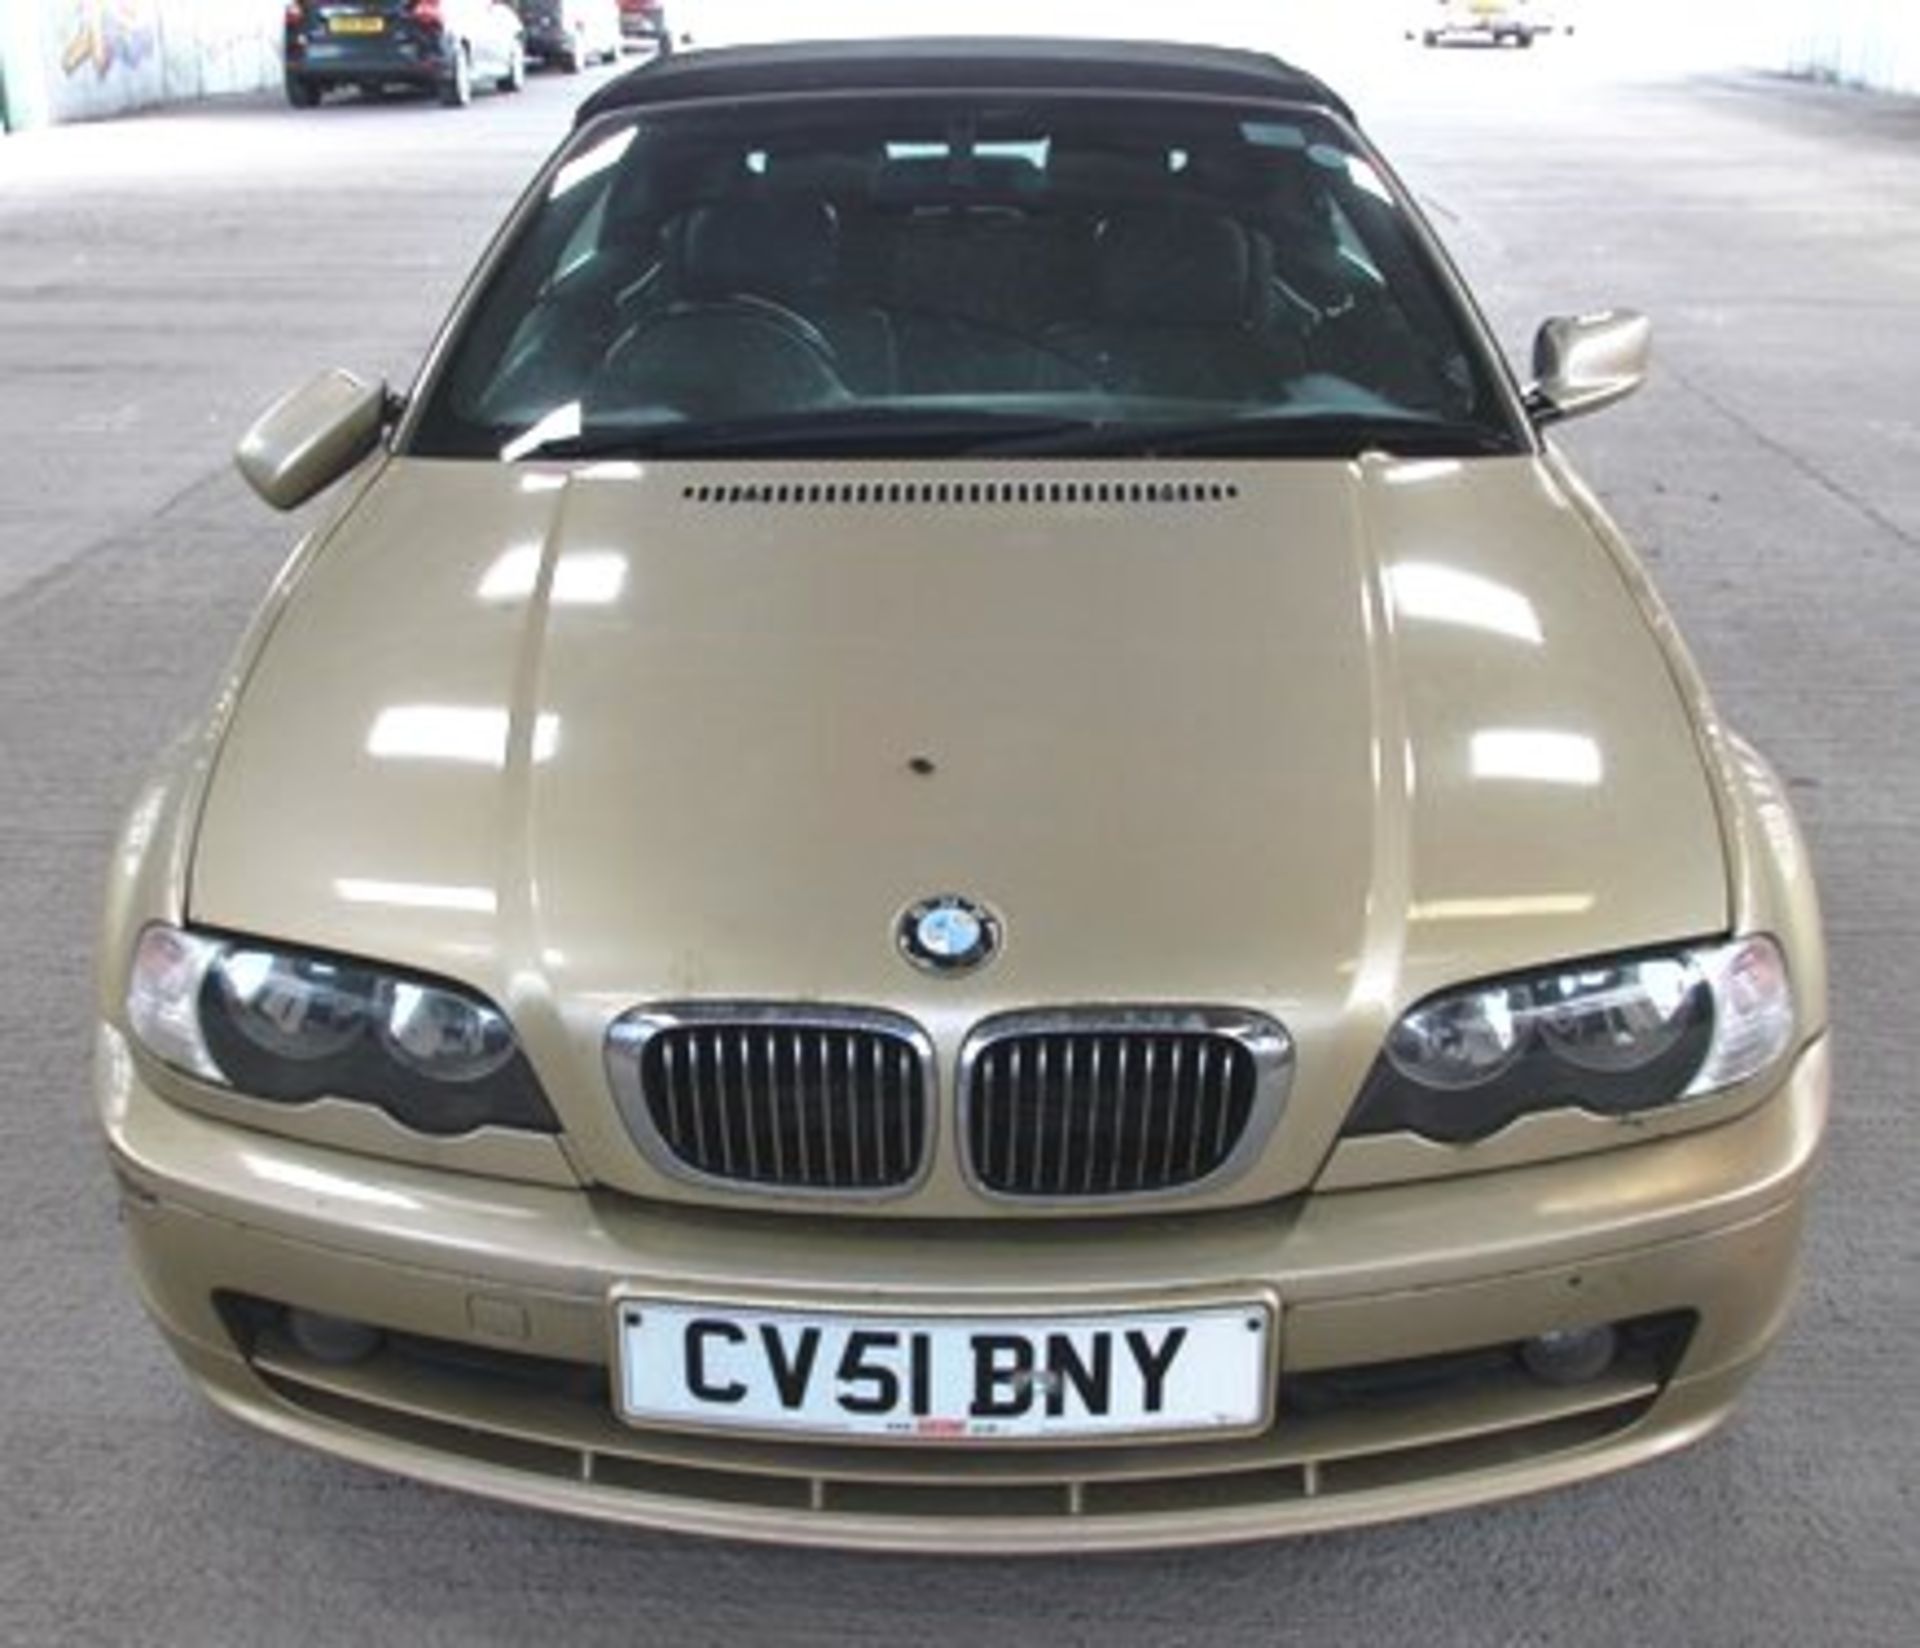 BMW 325CI petrol convertible car, Registration No. CV51 BNY, mileage 104743, 5 speed manual gearbox, - Image 3 of 10